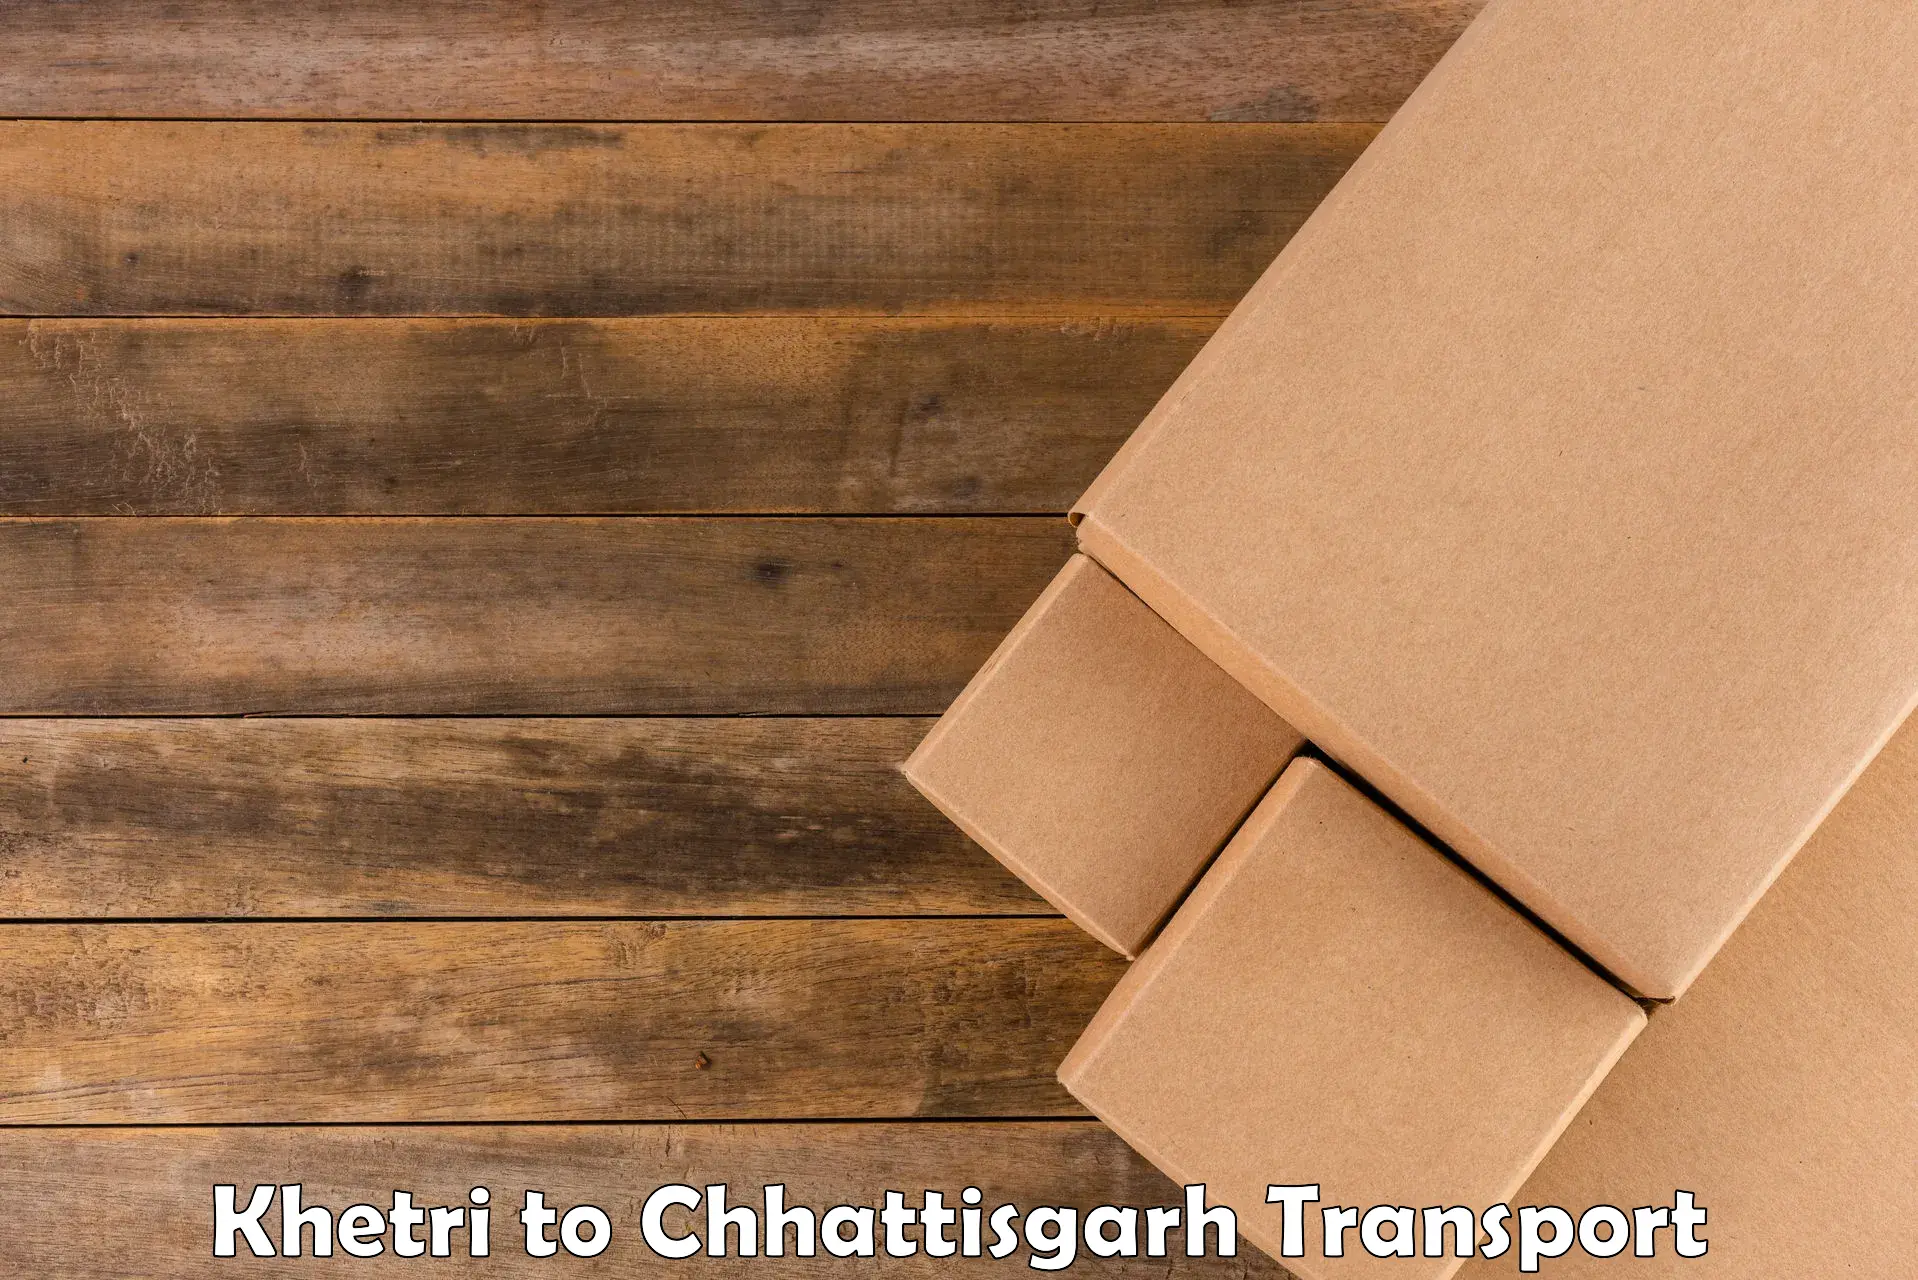 Cargo transport services in Khetri to bagbahra